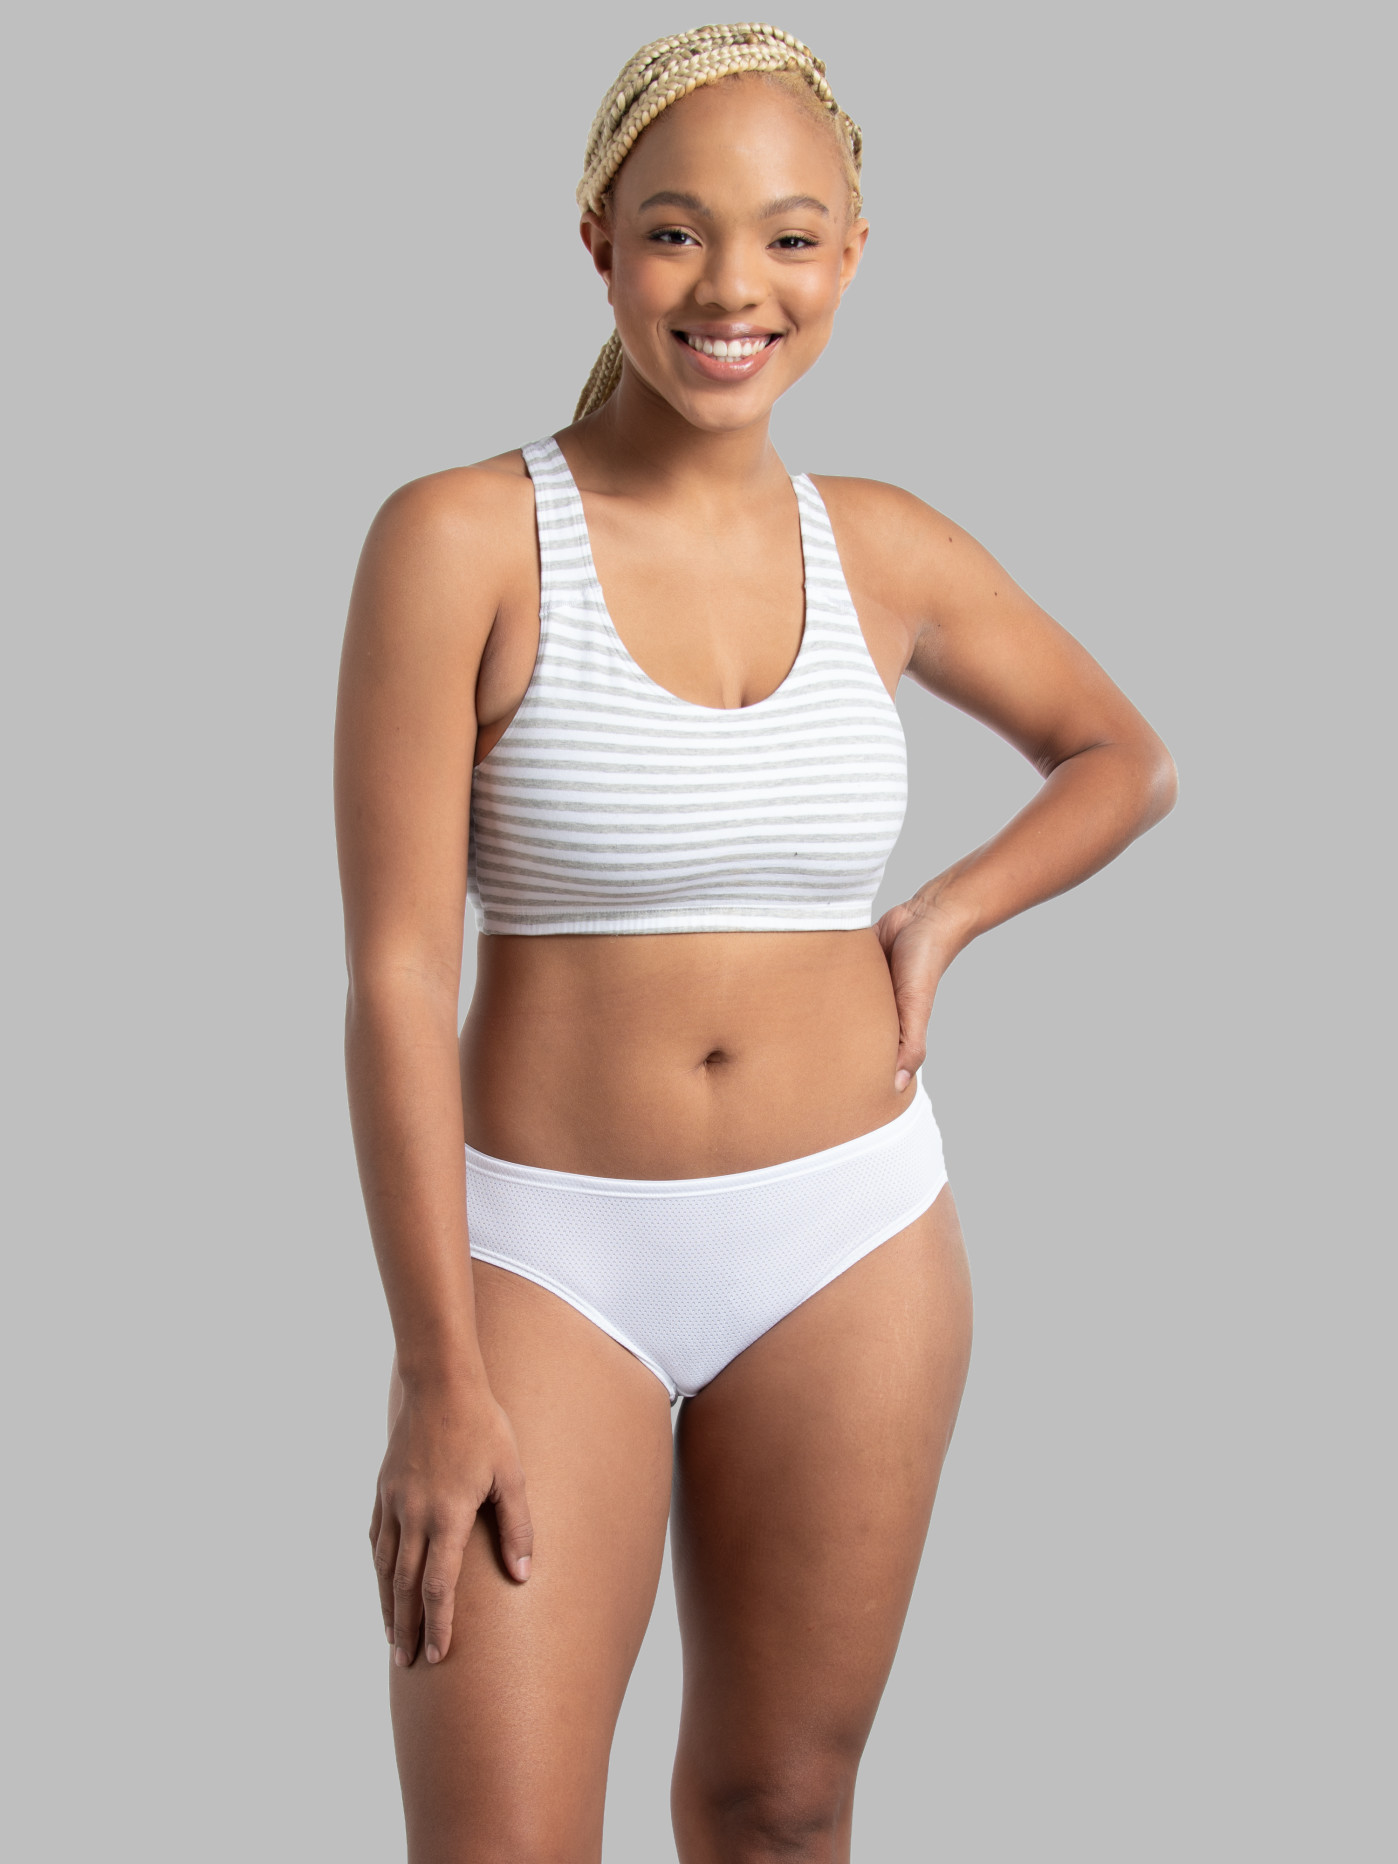 Fruit of the Loom Women's Premium Underwear (Ultra Soft & Breathable),  Breathable-Bikini-Basic Assorted, 5 at  Women's Clothing store